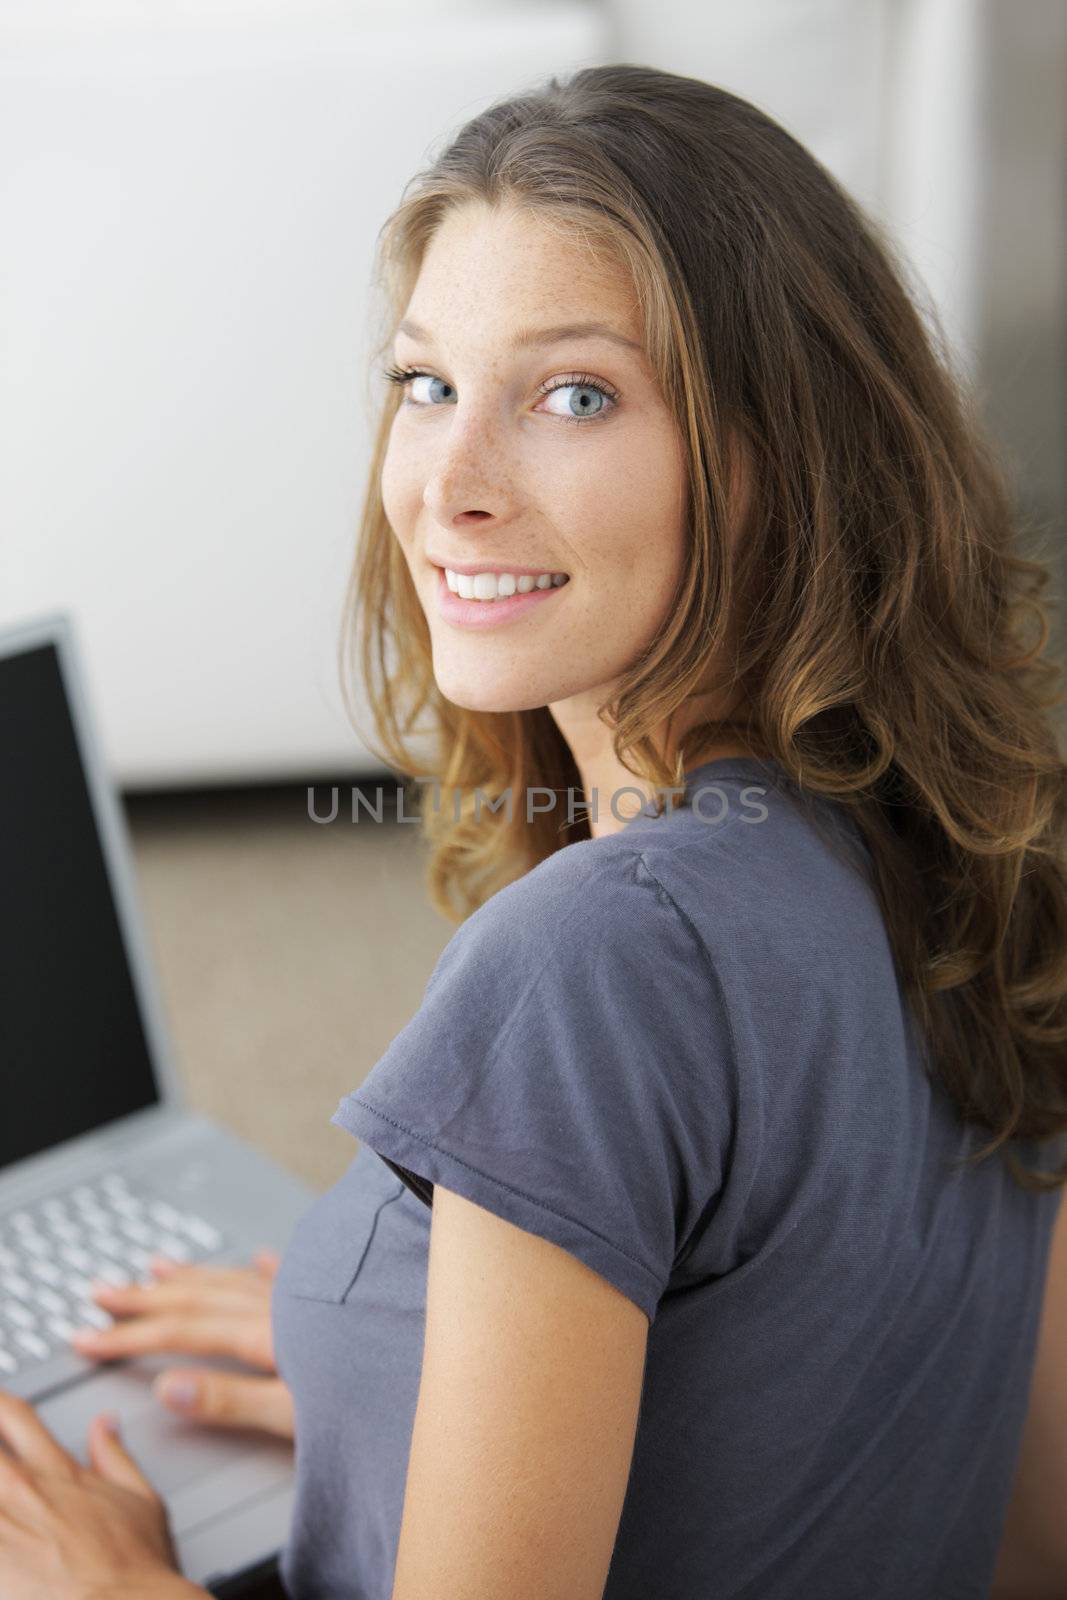 Closeup portrait of a happy young woman working on laptop